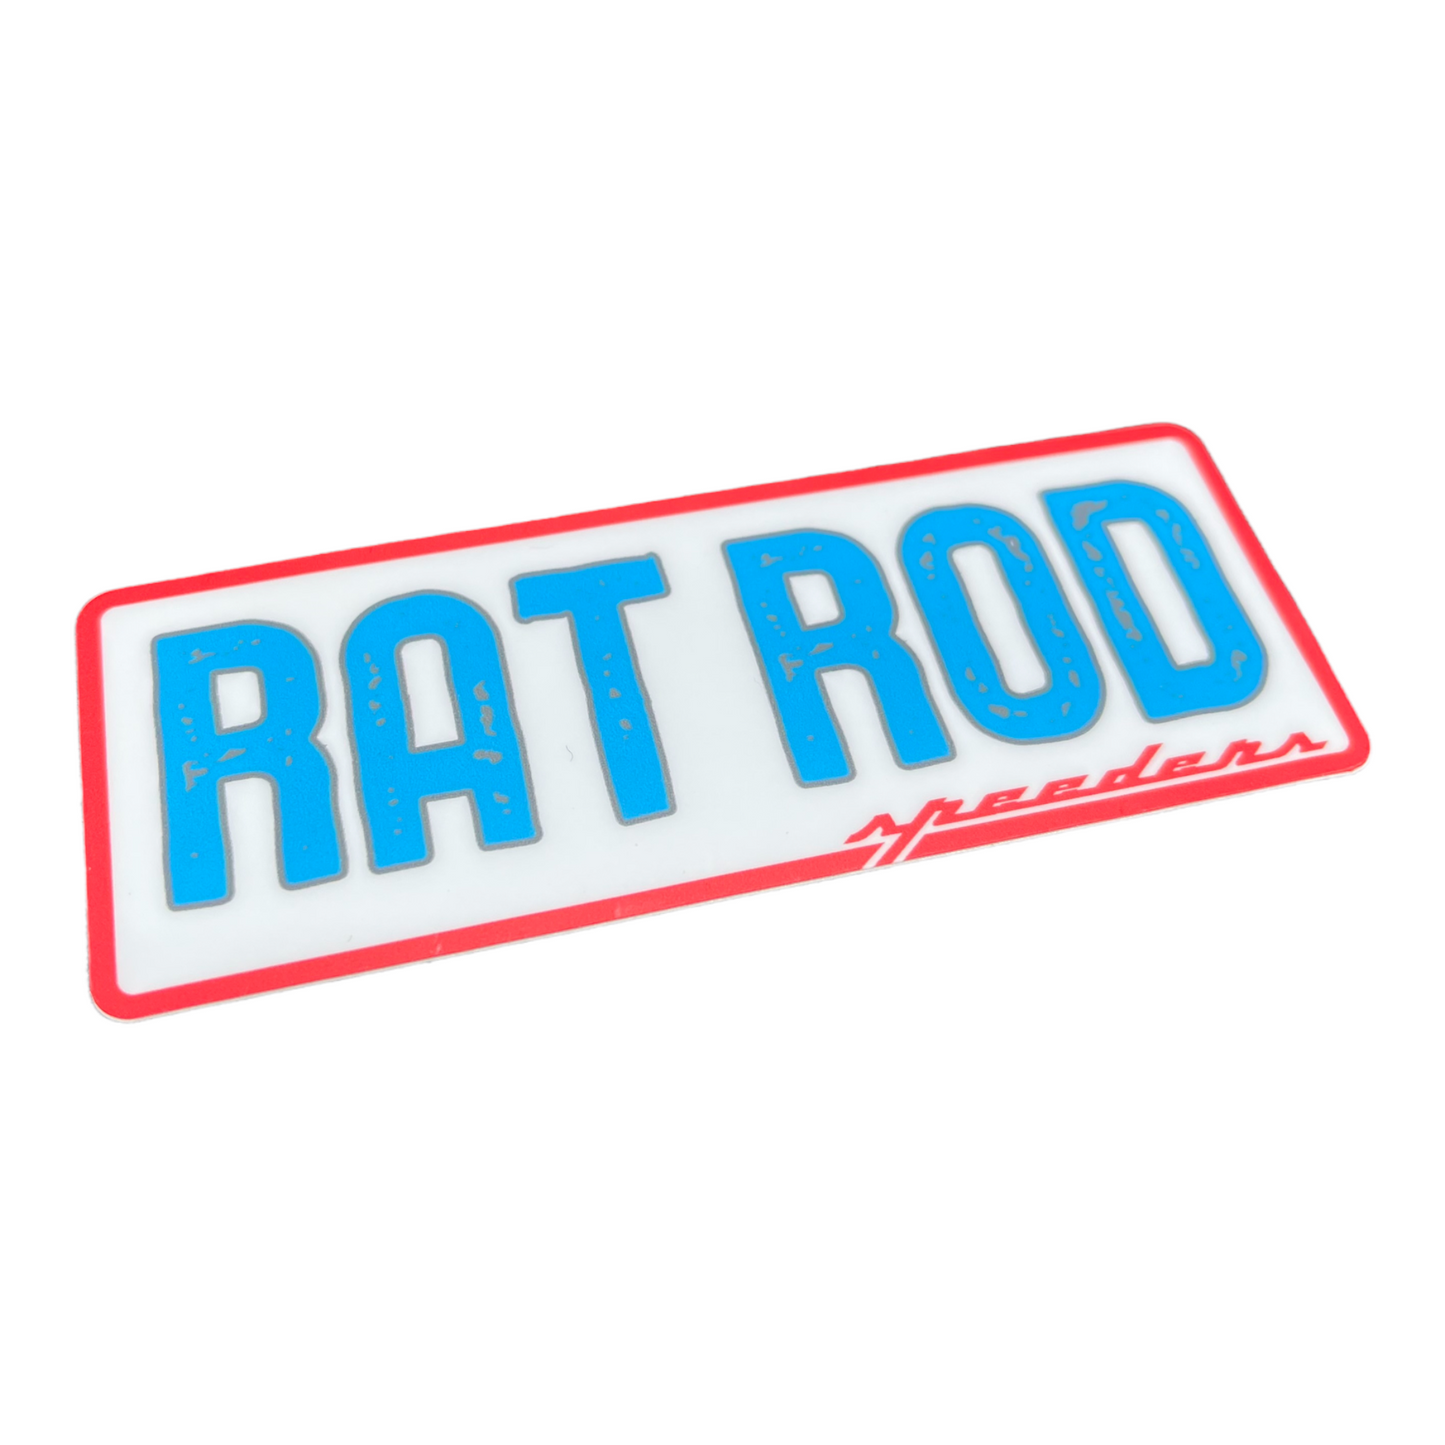 "Rat Rod" Automotive Sticker (Red, White, and Blue)